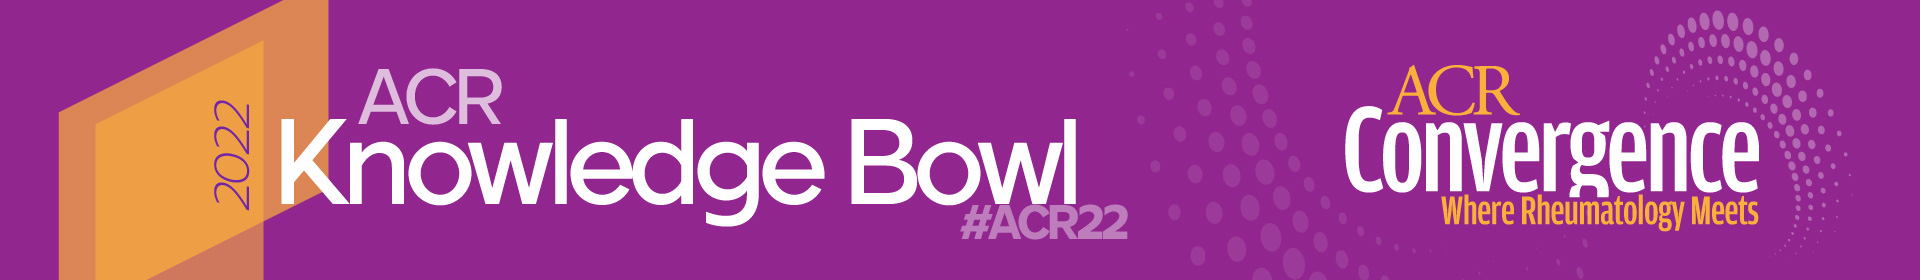 ACR Convergence 2022 Knowledge Bowl